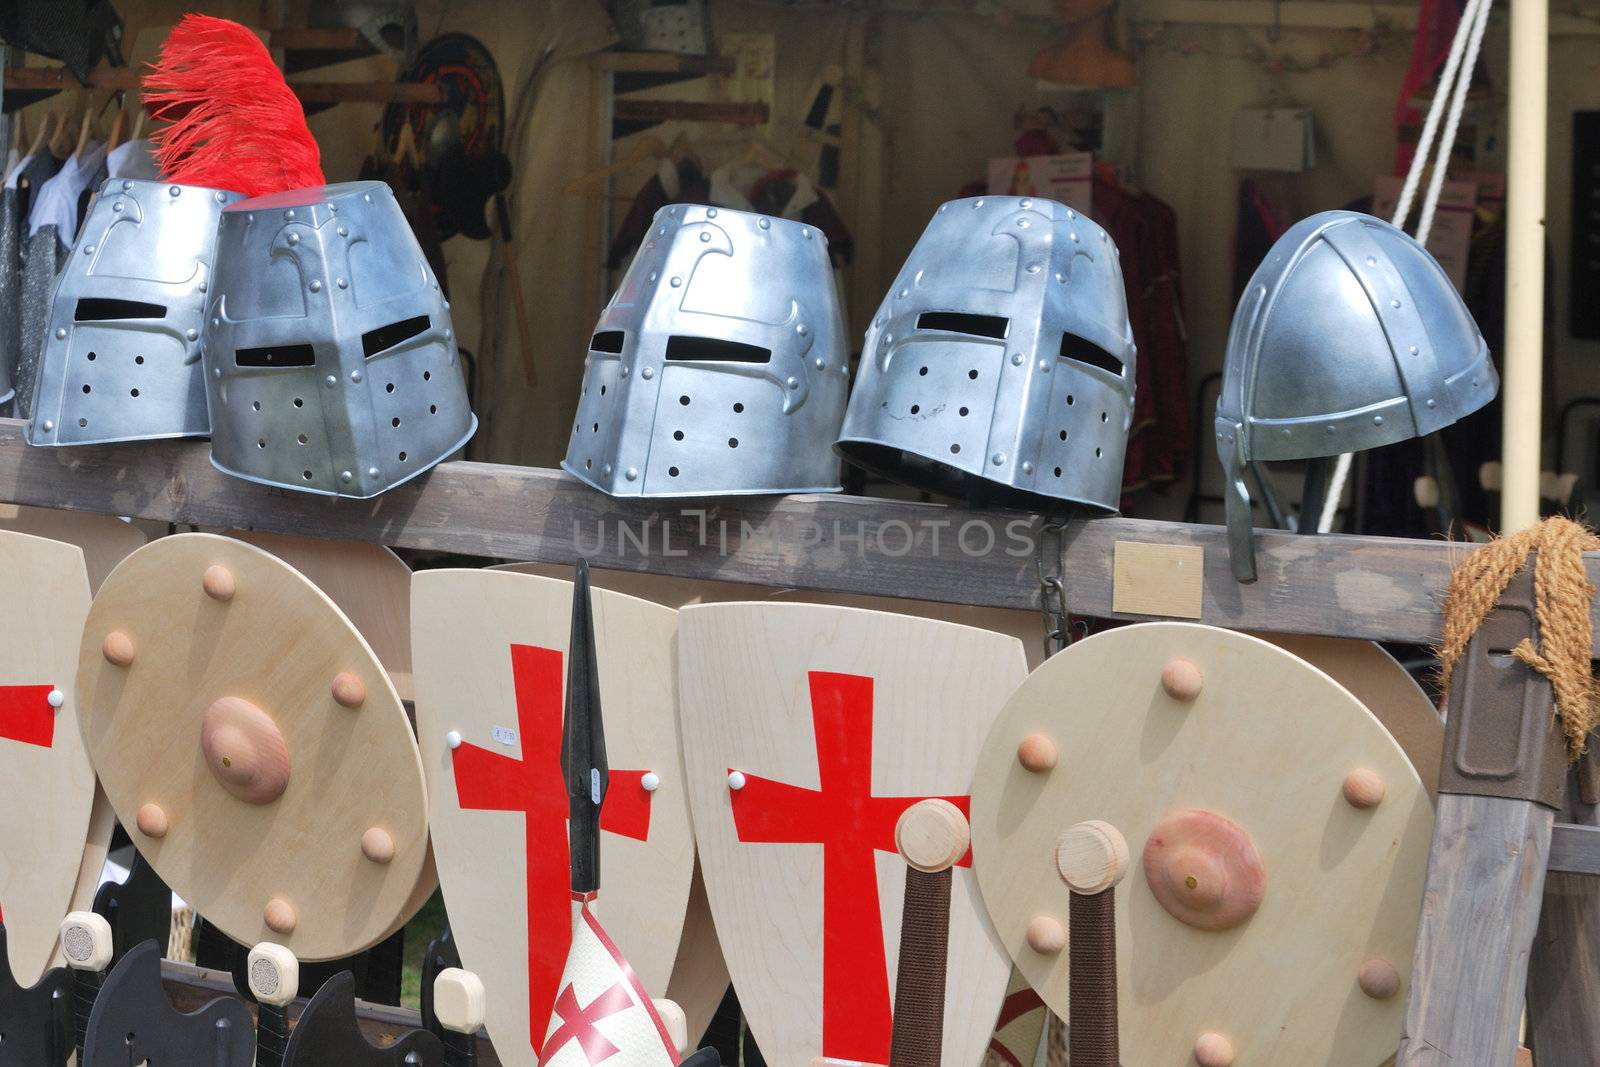 armour and shields by pauws99